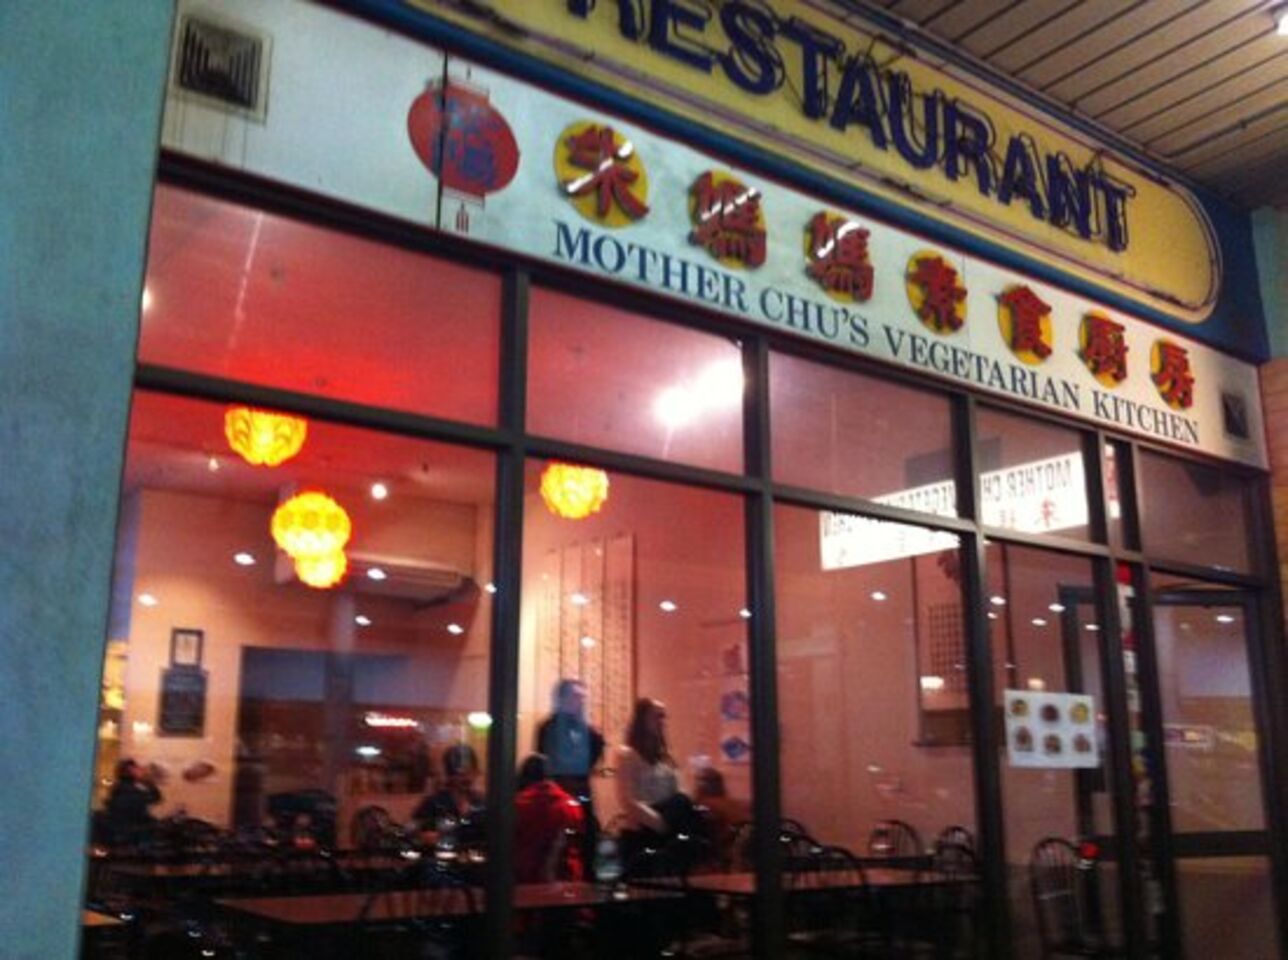 A photo of Mother Chu´s Vegetarian Kitchen